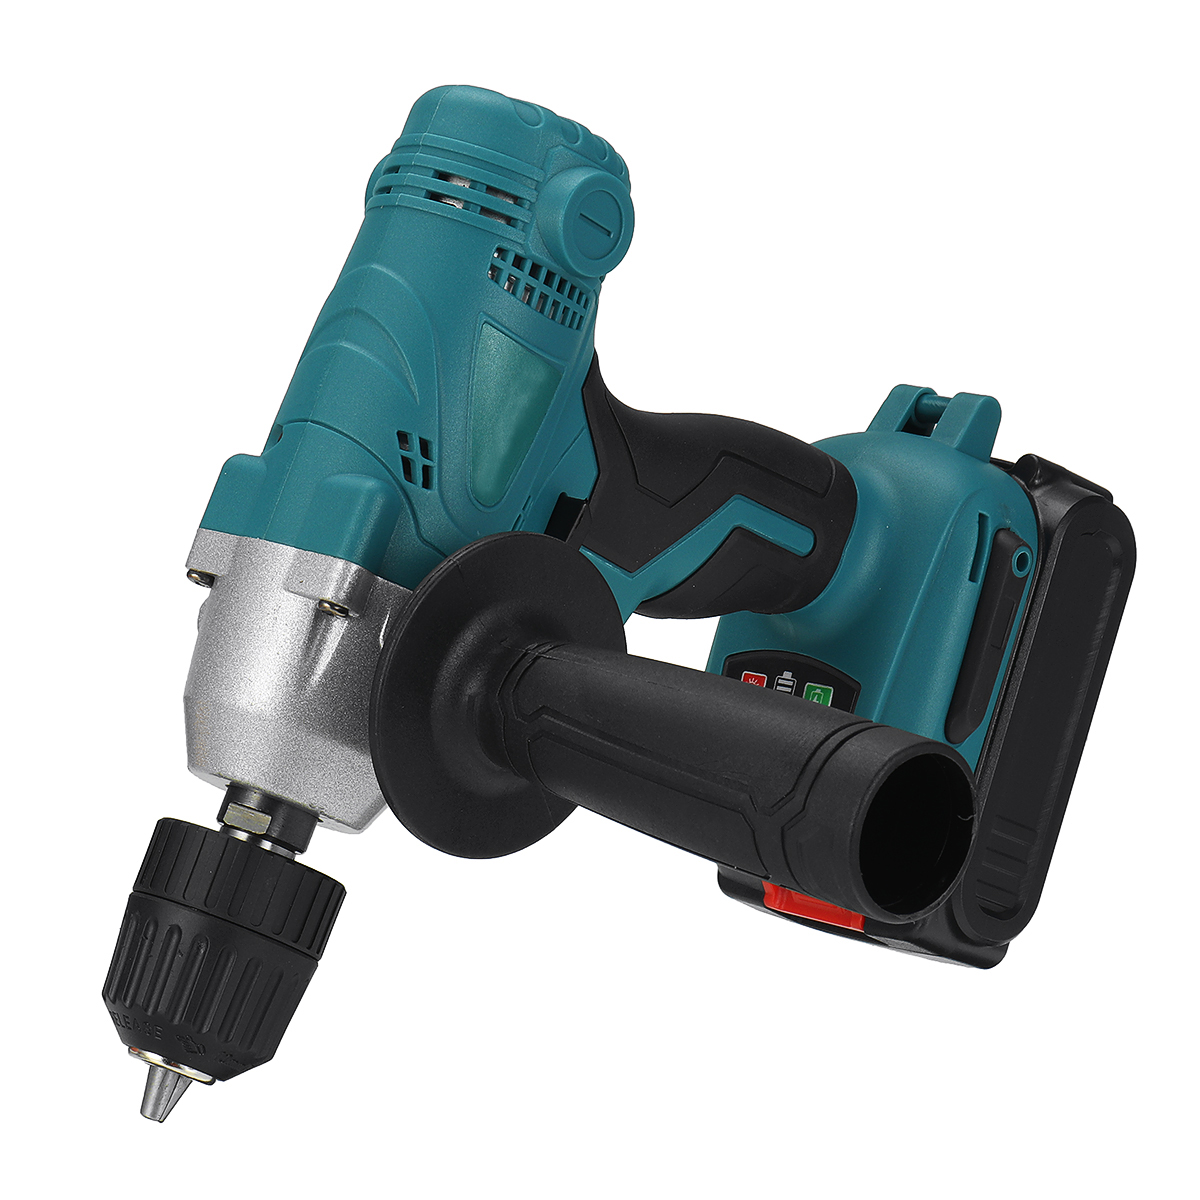 2800rmin-Speed-Regulated-2In1-Cordless-Electric-Drill-Polisher-15Ah-Battery-Car-Repair-Polisher-Dril-1889958-8